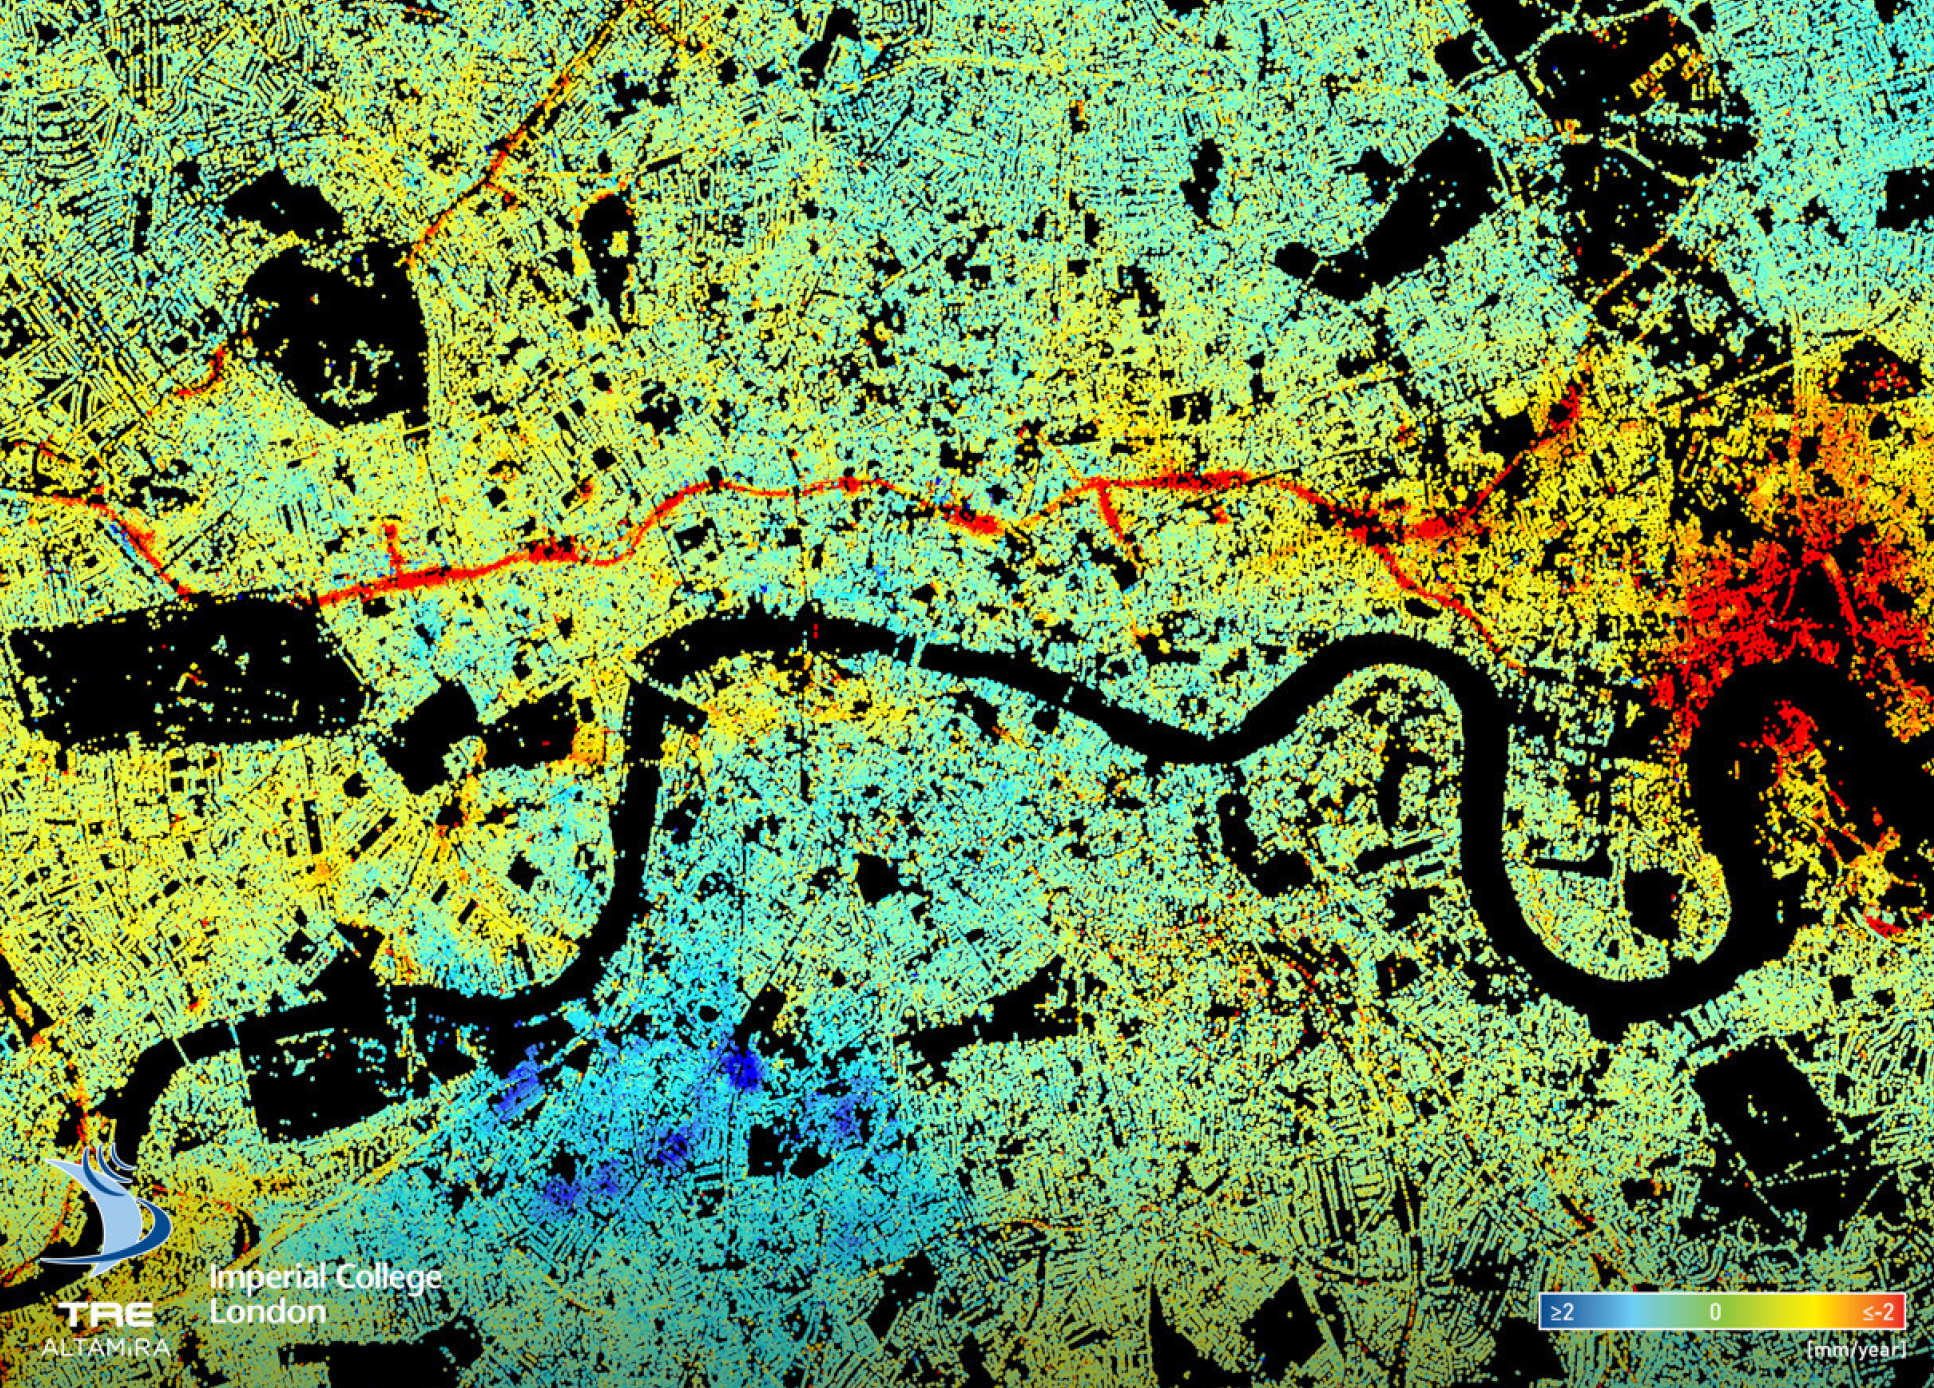 Bischoff's map clearly showing the effect of Crossrail to London's ground level